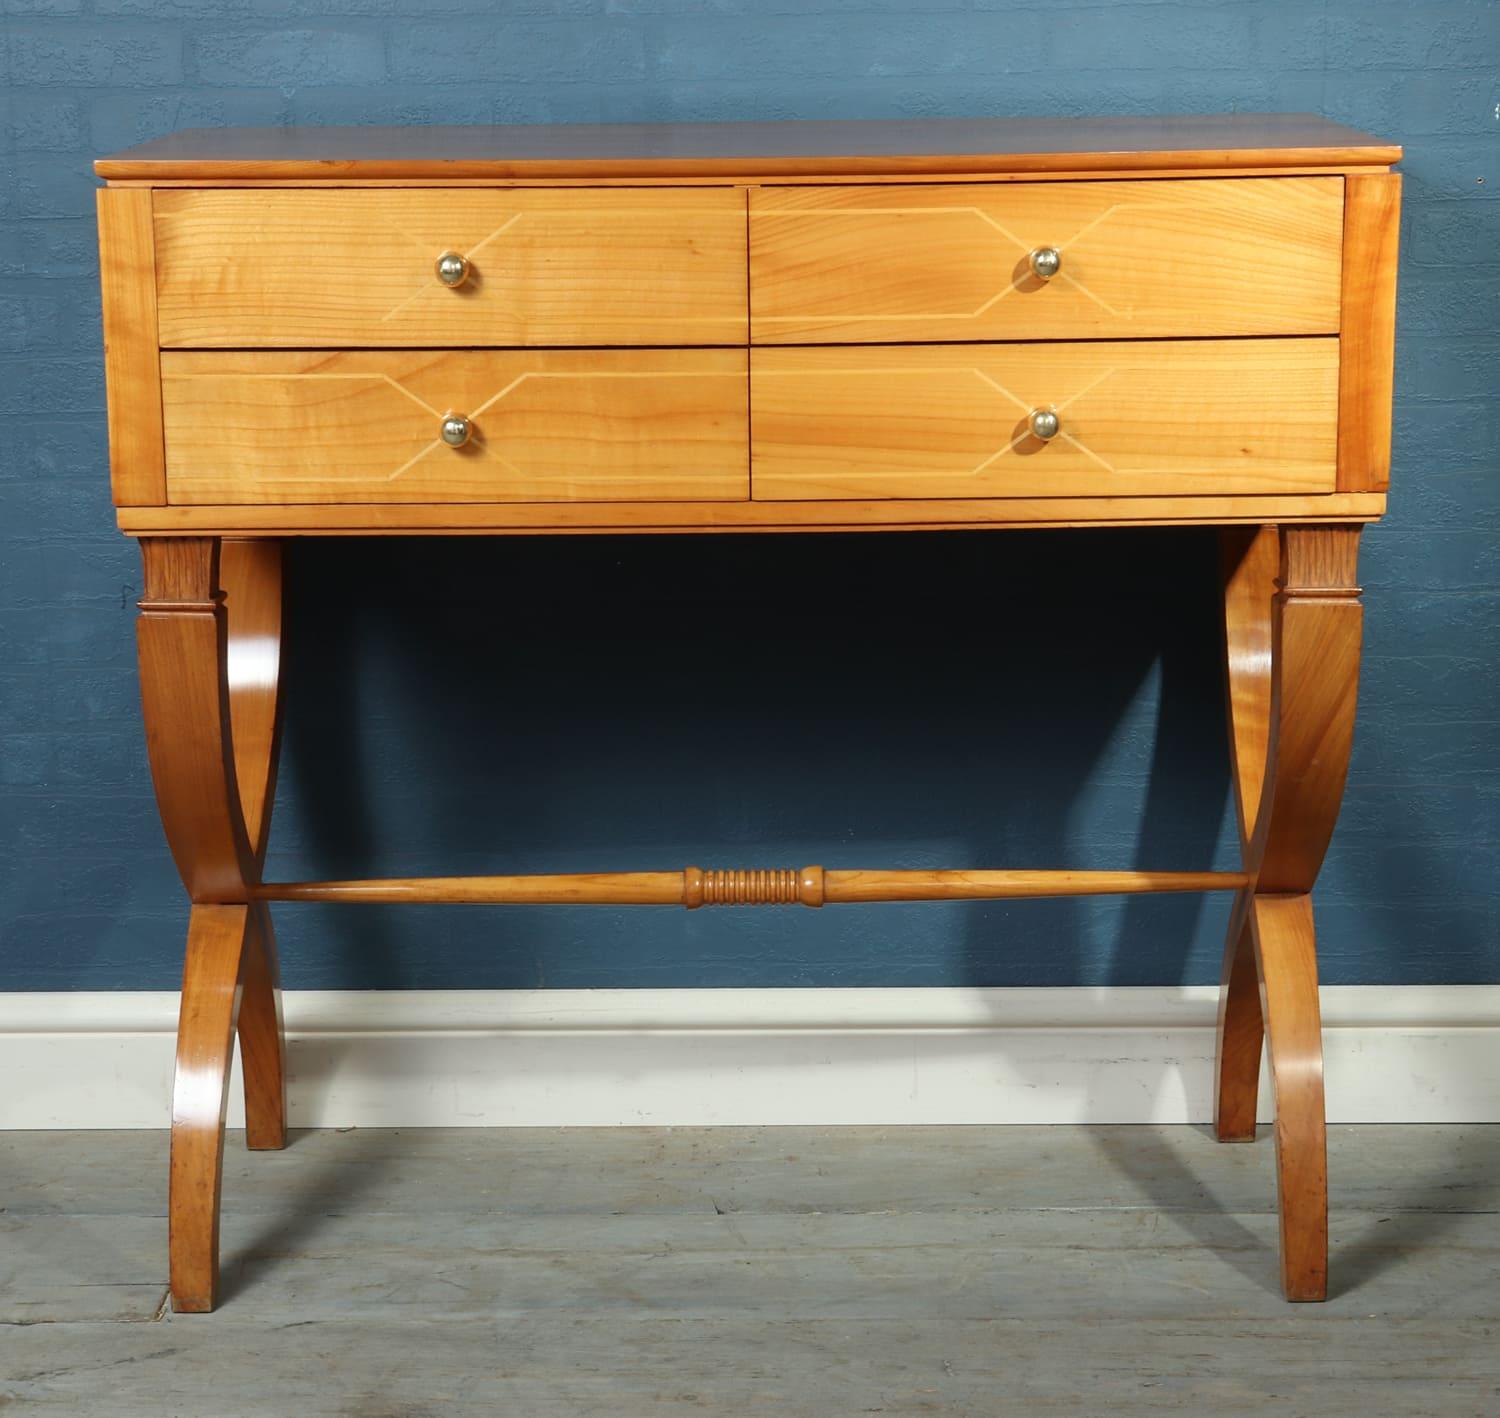 Mid century Italian commode in solid cherry

This commode chest of drawers on stand is of Italian Design from the 1950’s with strong attributions to Paolo Buffa. The Chest is produced in Solid cherry it has four drawers each with dovetail joint